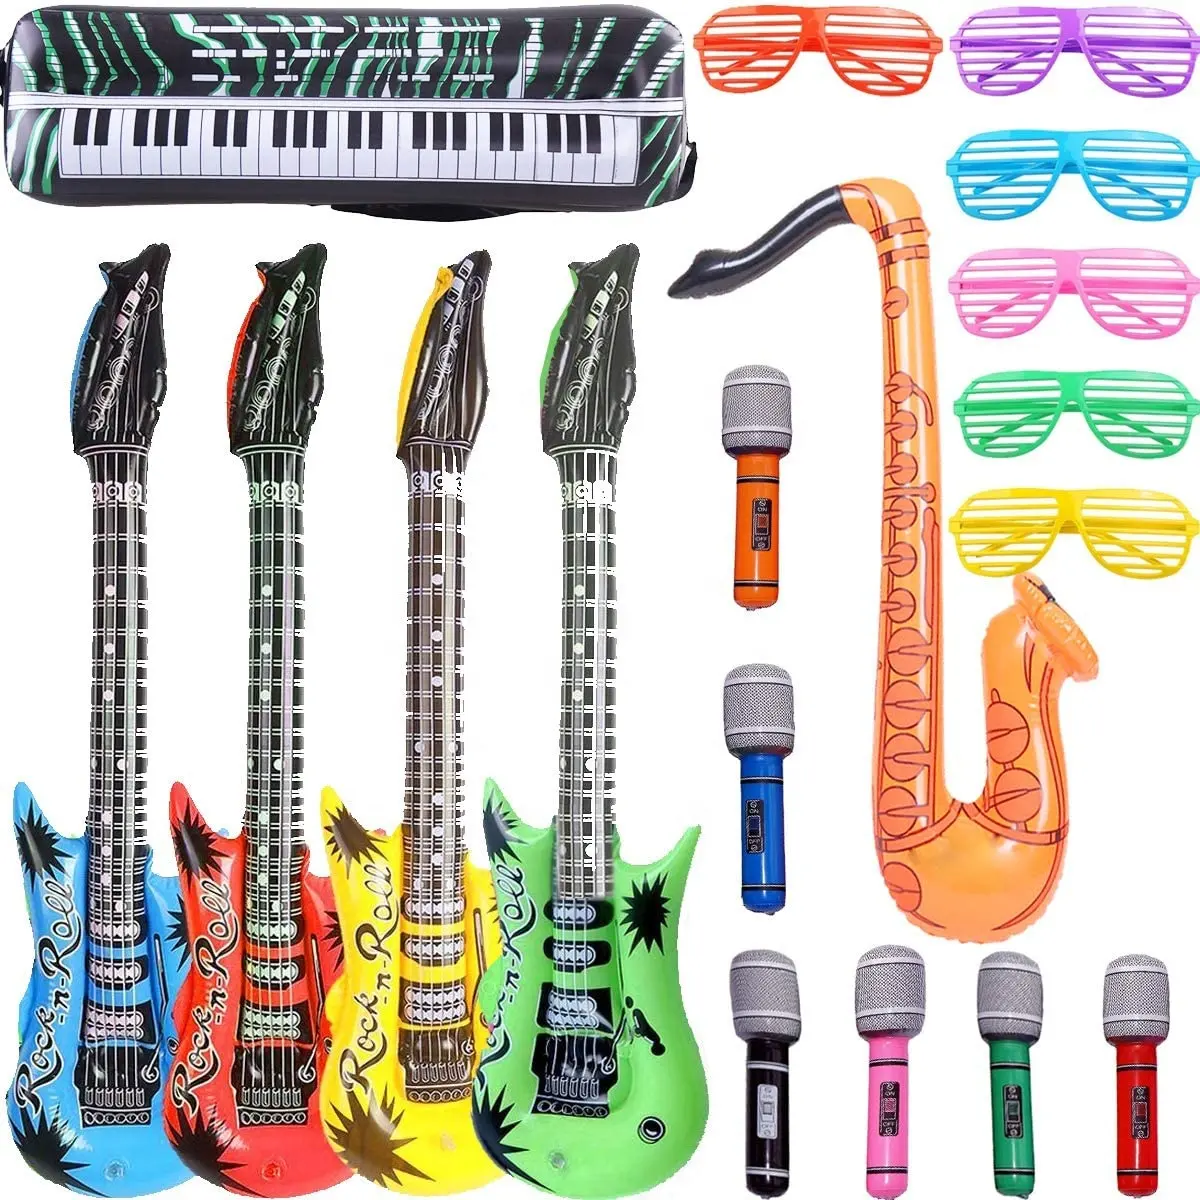 18 Pack Inflatable Party Props 4 Inflatable Guitar 6 Microphones 6 Shutter Shading Glasses Inflatable Rock Star Toy Set